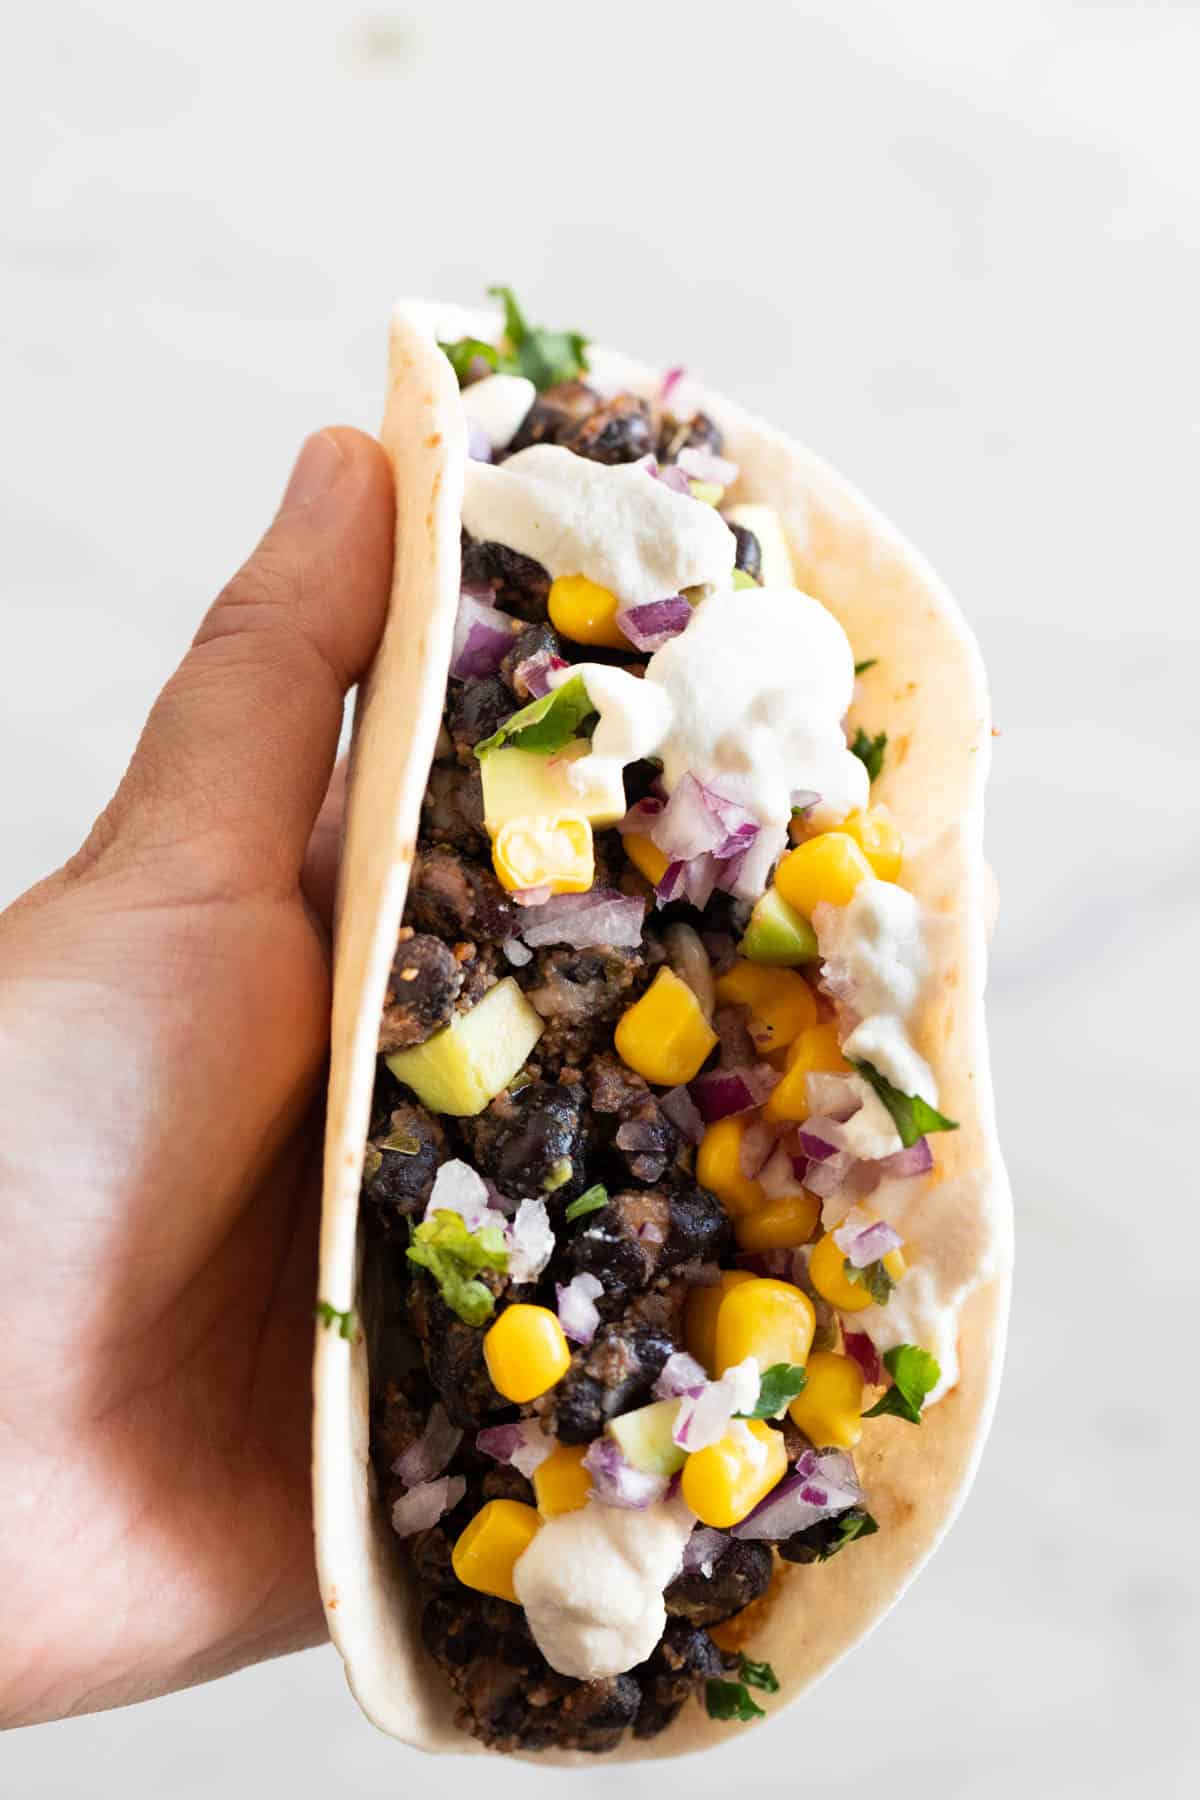 A hand holding a finished taco.